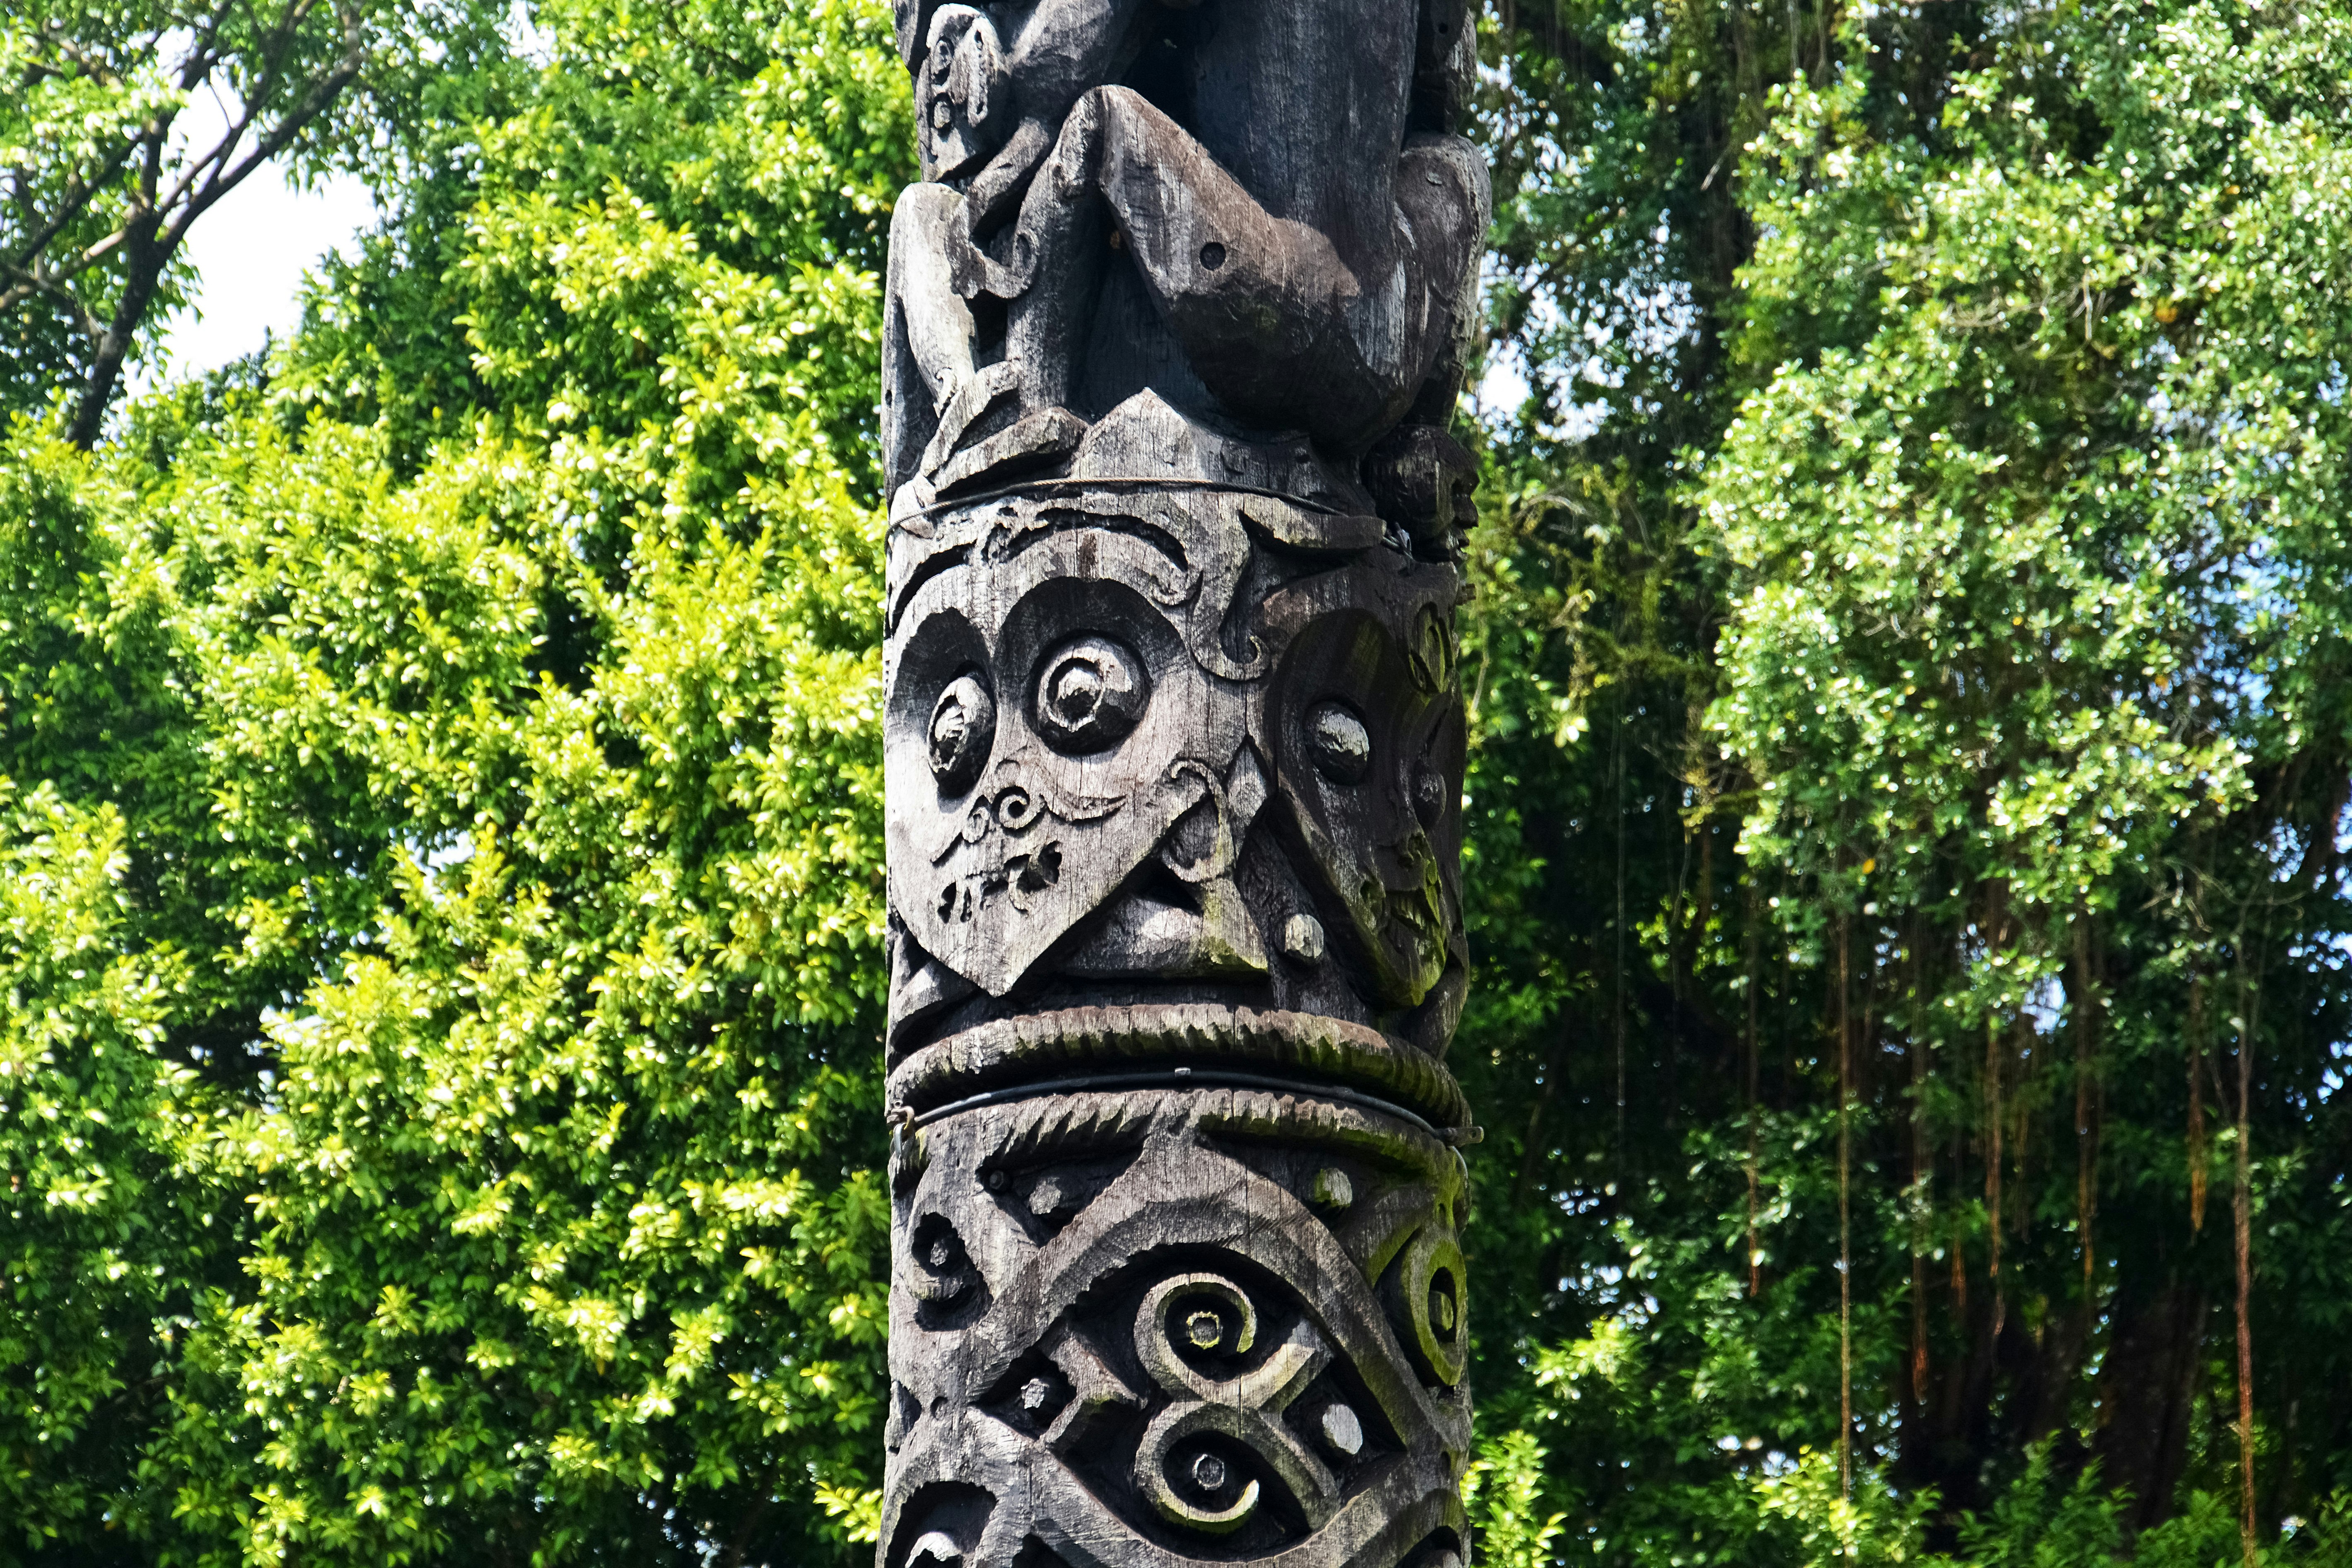 brown wooden statue near green trees during daytime